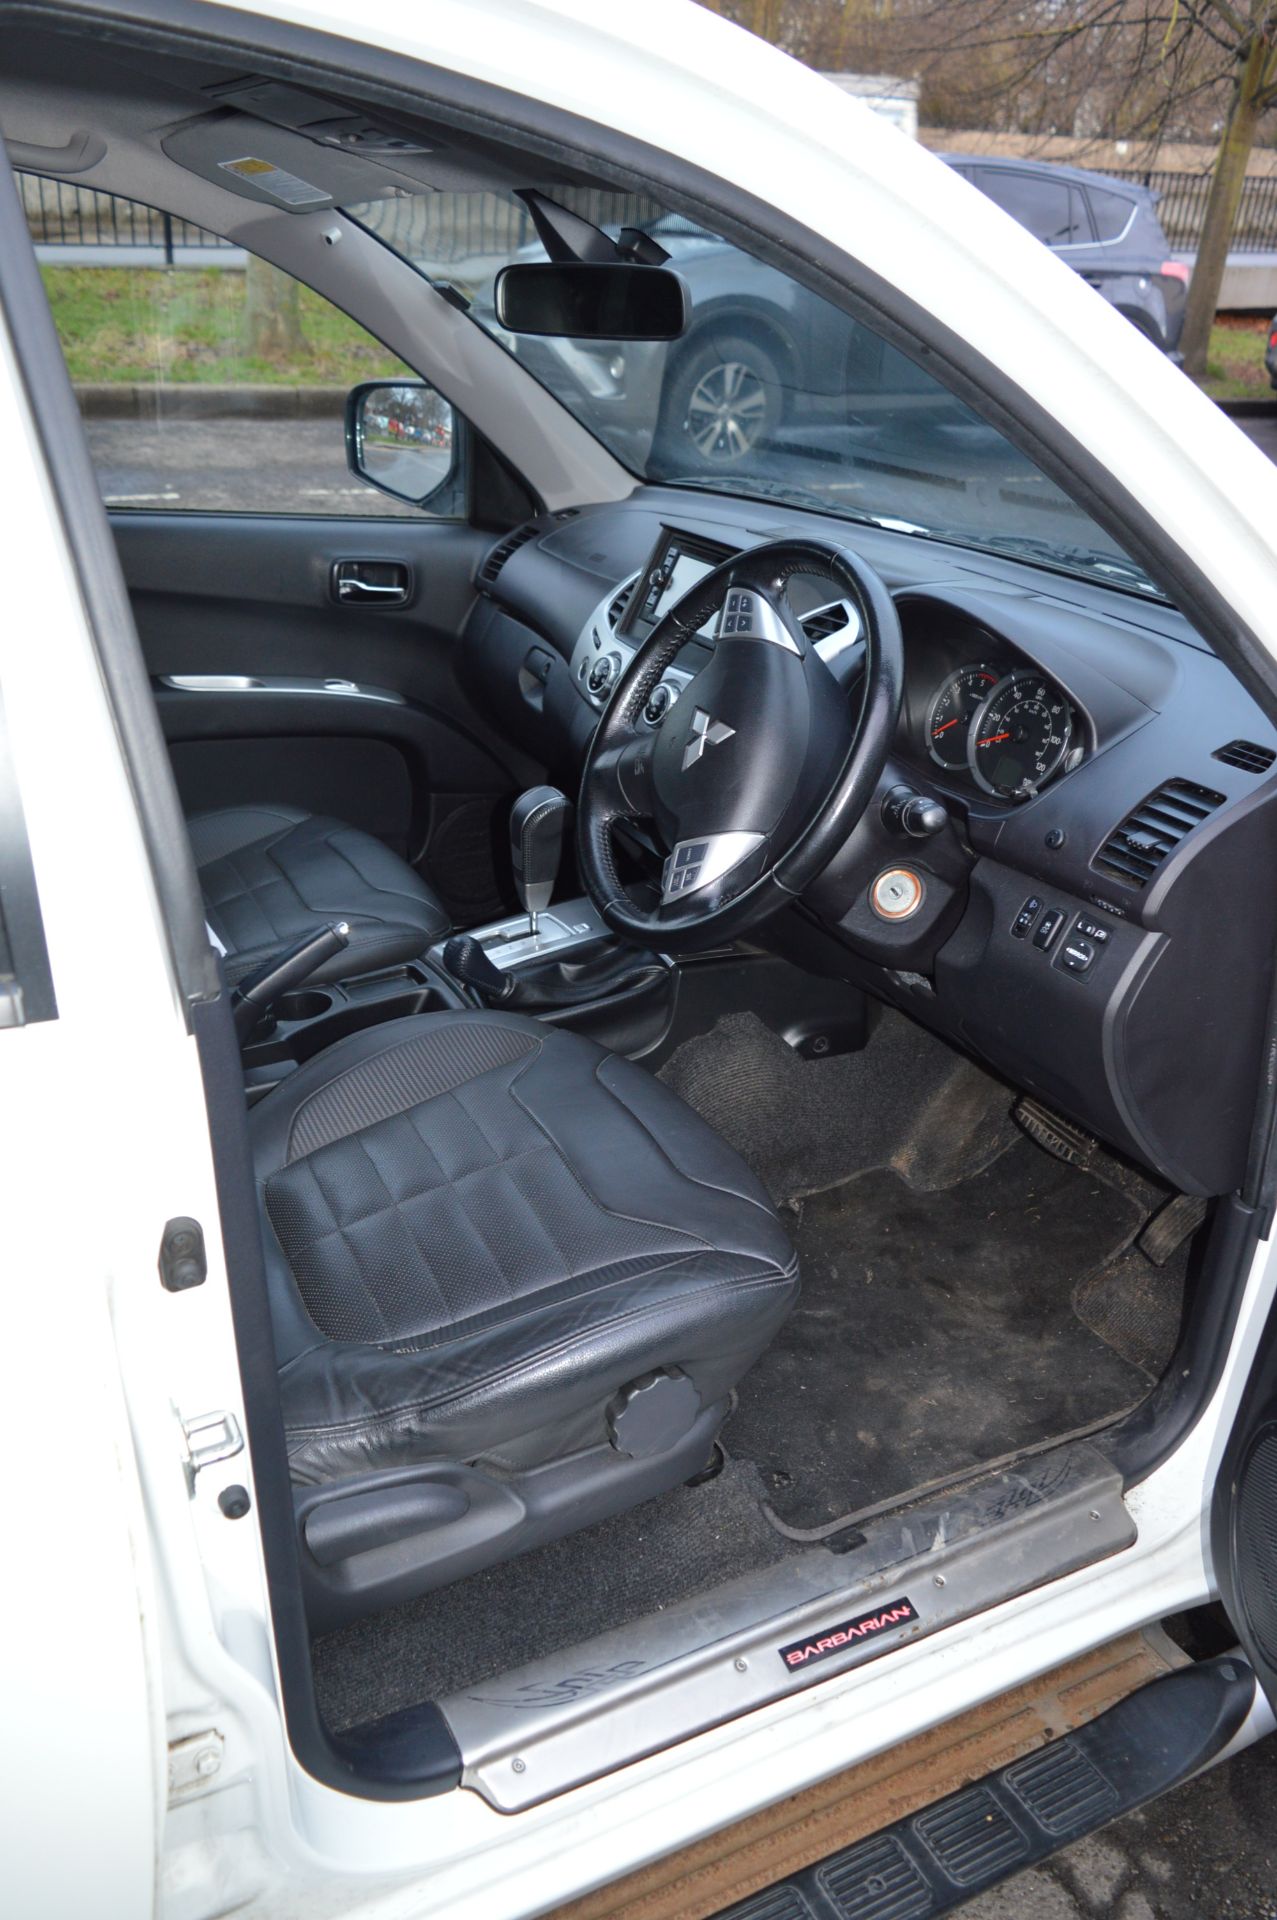 Mitsubishi L200 Barbarian Pick up Truck with Adven - Image 2 of 5